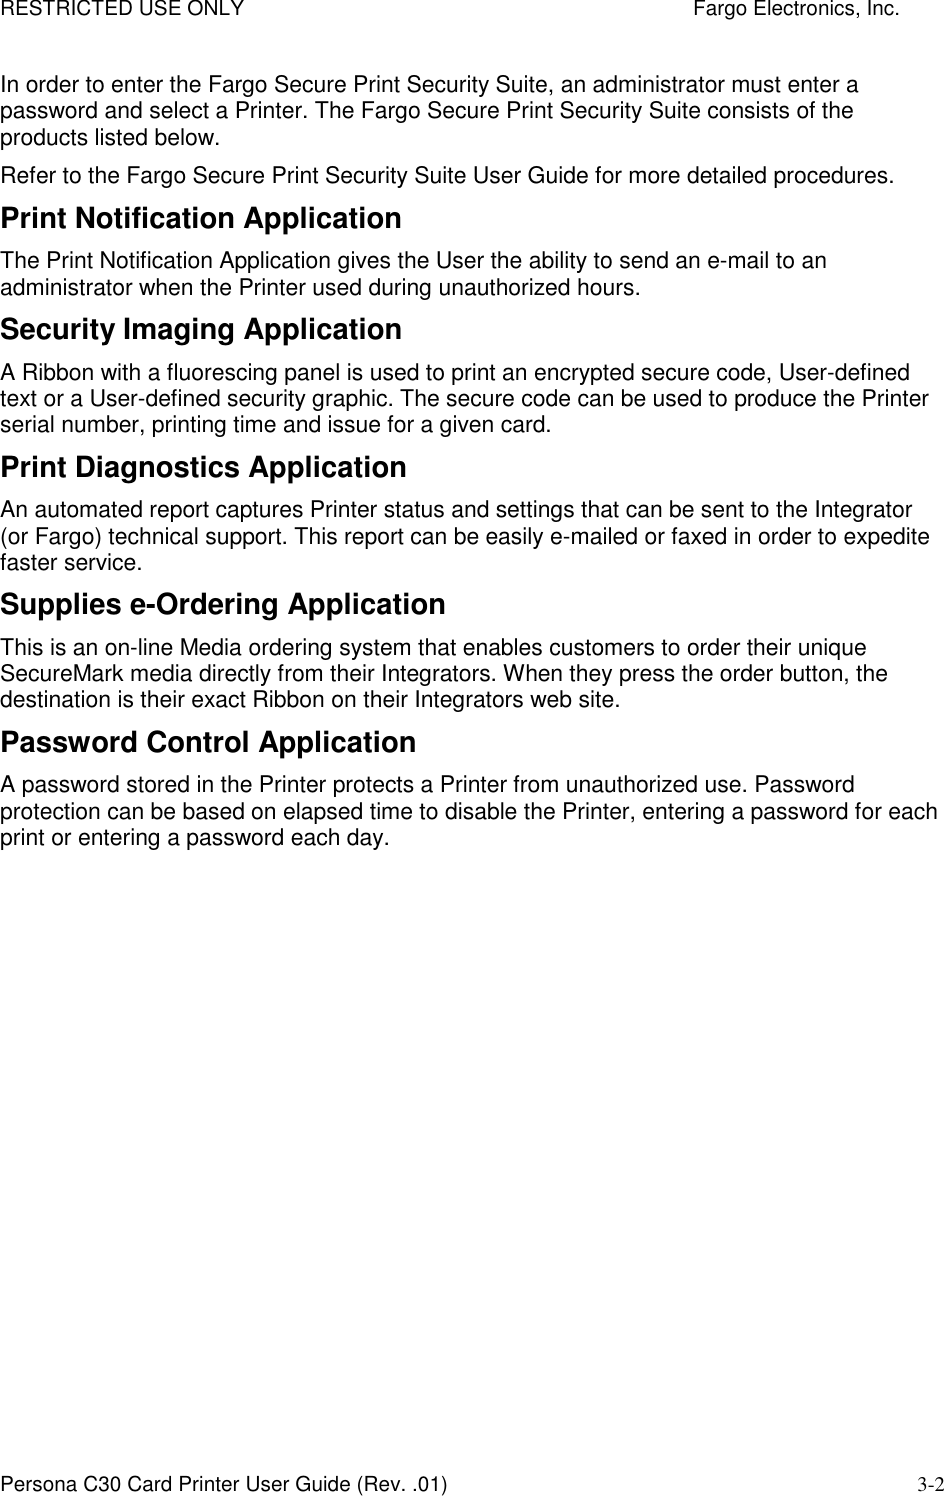 RESTRICTED USE ONLY    Fargo Electronics, Inc. Persona C30 Card Printer User Guide (Rev. .01) 3-2 In order to enter the Fargo Secure Print Security Suite, an administrator must enter a password and select a Printer. The Fargo Secure Print Security Suite consists of the products listed below.   Refer to the Fargo Secure Print Security Suite User Guide for more detailed procedures. Print Notification Application The Print Notification Application gives the User the ability to send an e-mail to an administrator when the Printer used during unauthorized hours.  Security Imaging Application A Ribbon with a fluorescing panel is used to print an encrypted secure code, User-defined text or a User-defined security graphic. The secure code can be used to produce the Printer serial number, printing time and issue for a given card.  Print Diagnostics Application An automated report captures Printer status and settings that can be sent to the Integrator (or Fargo) technical support. This report can be easily e-mailed or faxed in order to expedite faster service.  Supplies e-Ordering Application This is an on-line Media ordering system that enables customers to order their unique SecureMark media directly from their Integrators. When they press the order button, the destination is their exact Ribbon on their Integrators web site.  Password Control Application A password stored in the Printer protects a Printer from unauthorized use. Password protection can be based on elapsed time to disable the Printer, entering a password for each print or entering a password each day.  